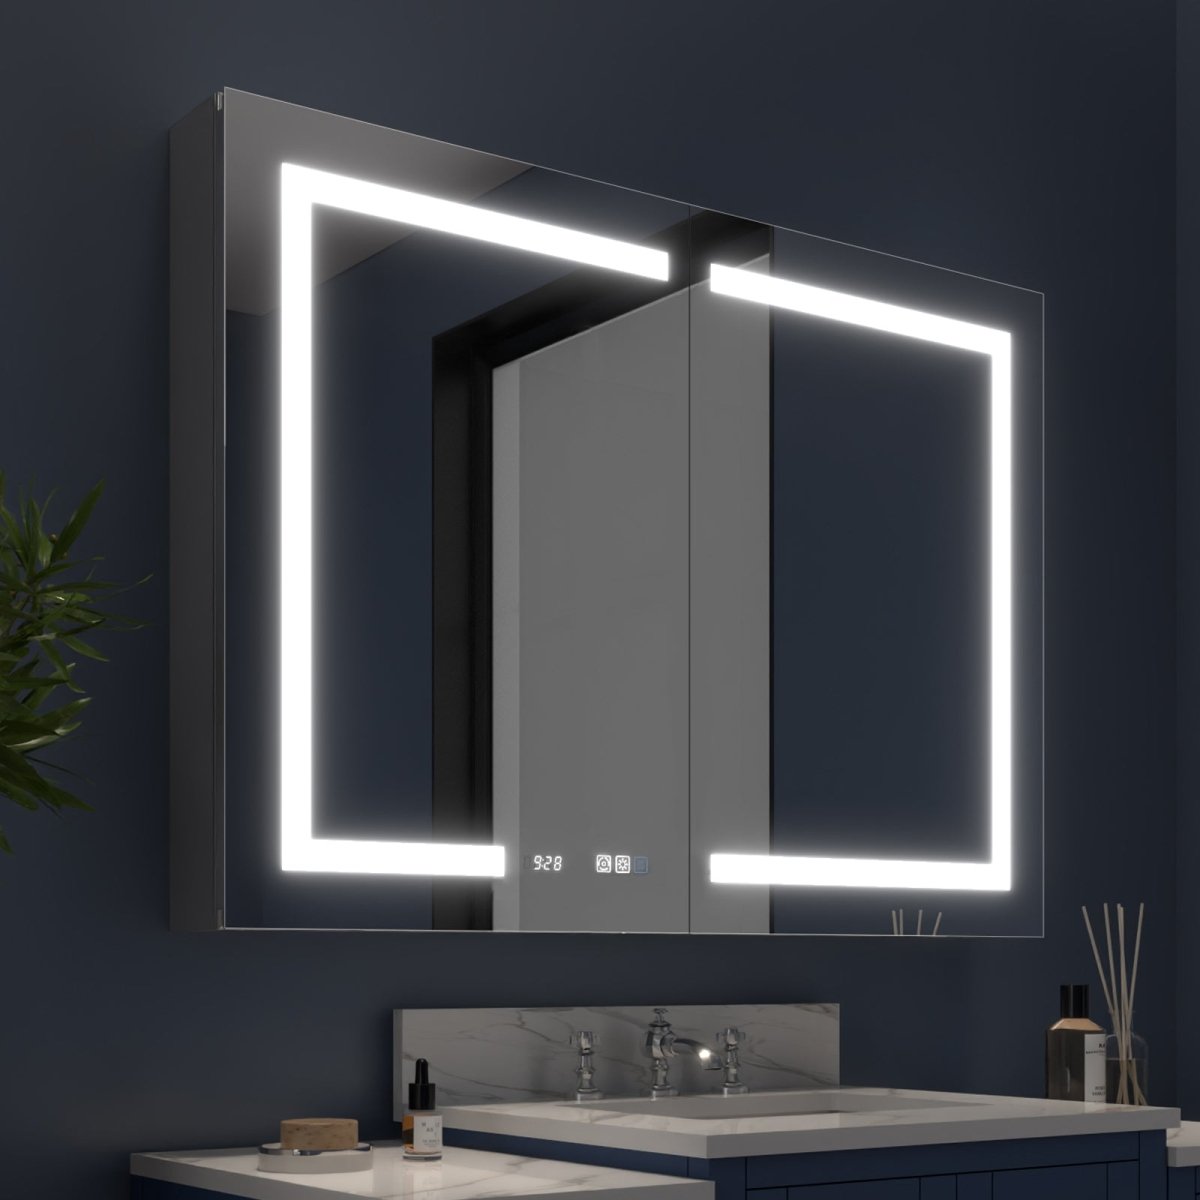 Boost-M2 44" W x 32" H Bathroom Light Medicine Cabinets with Vanity Mirror Recessed or Surface